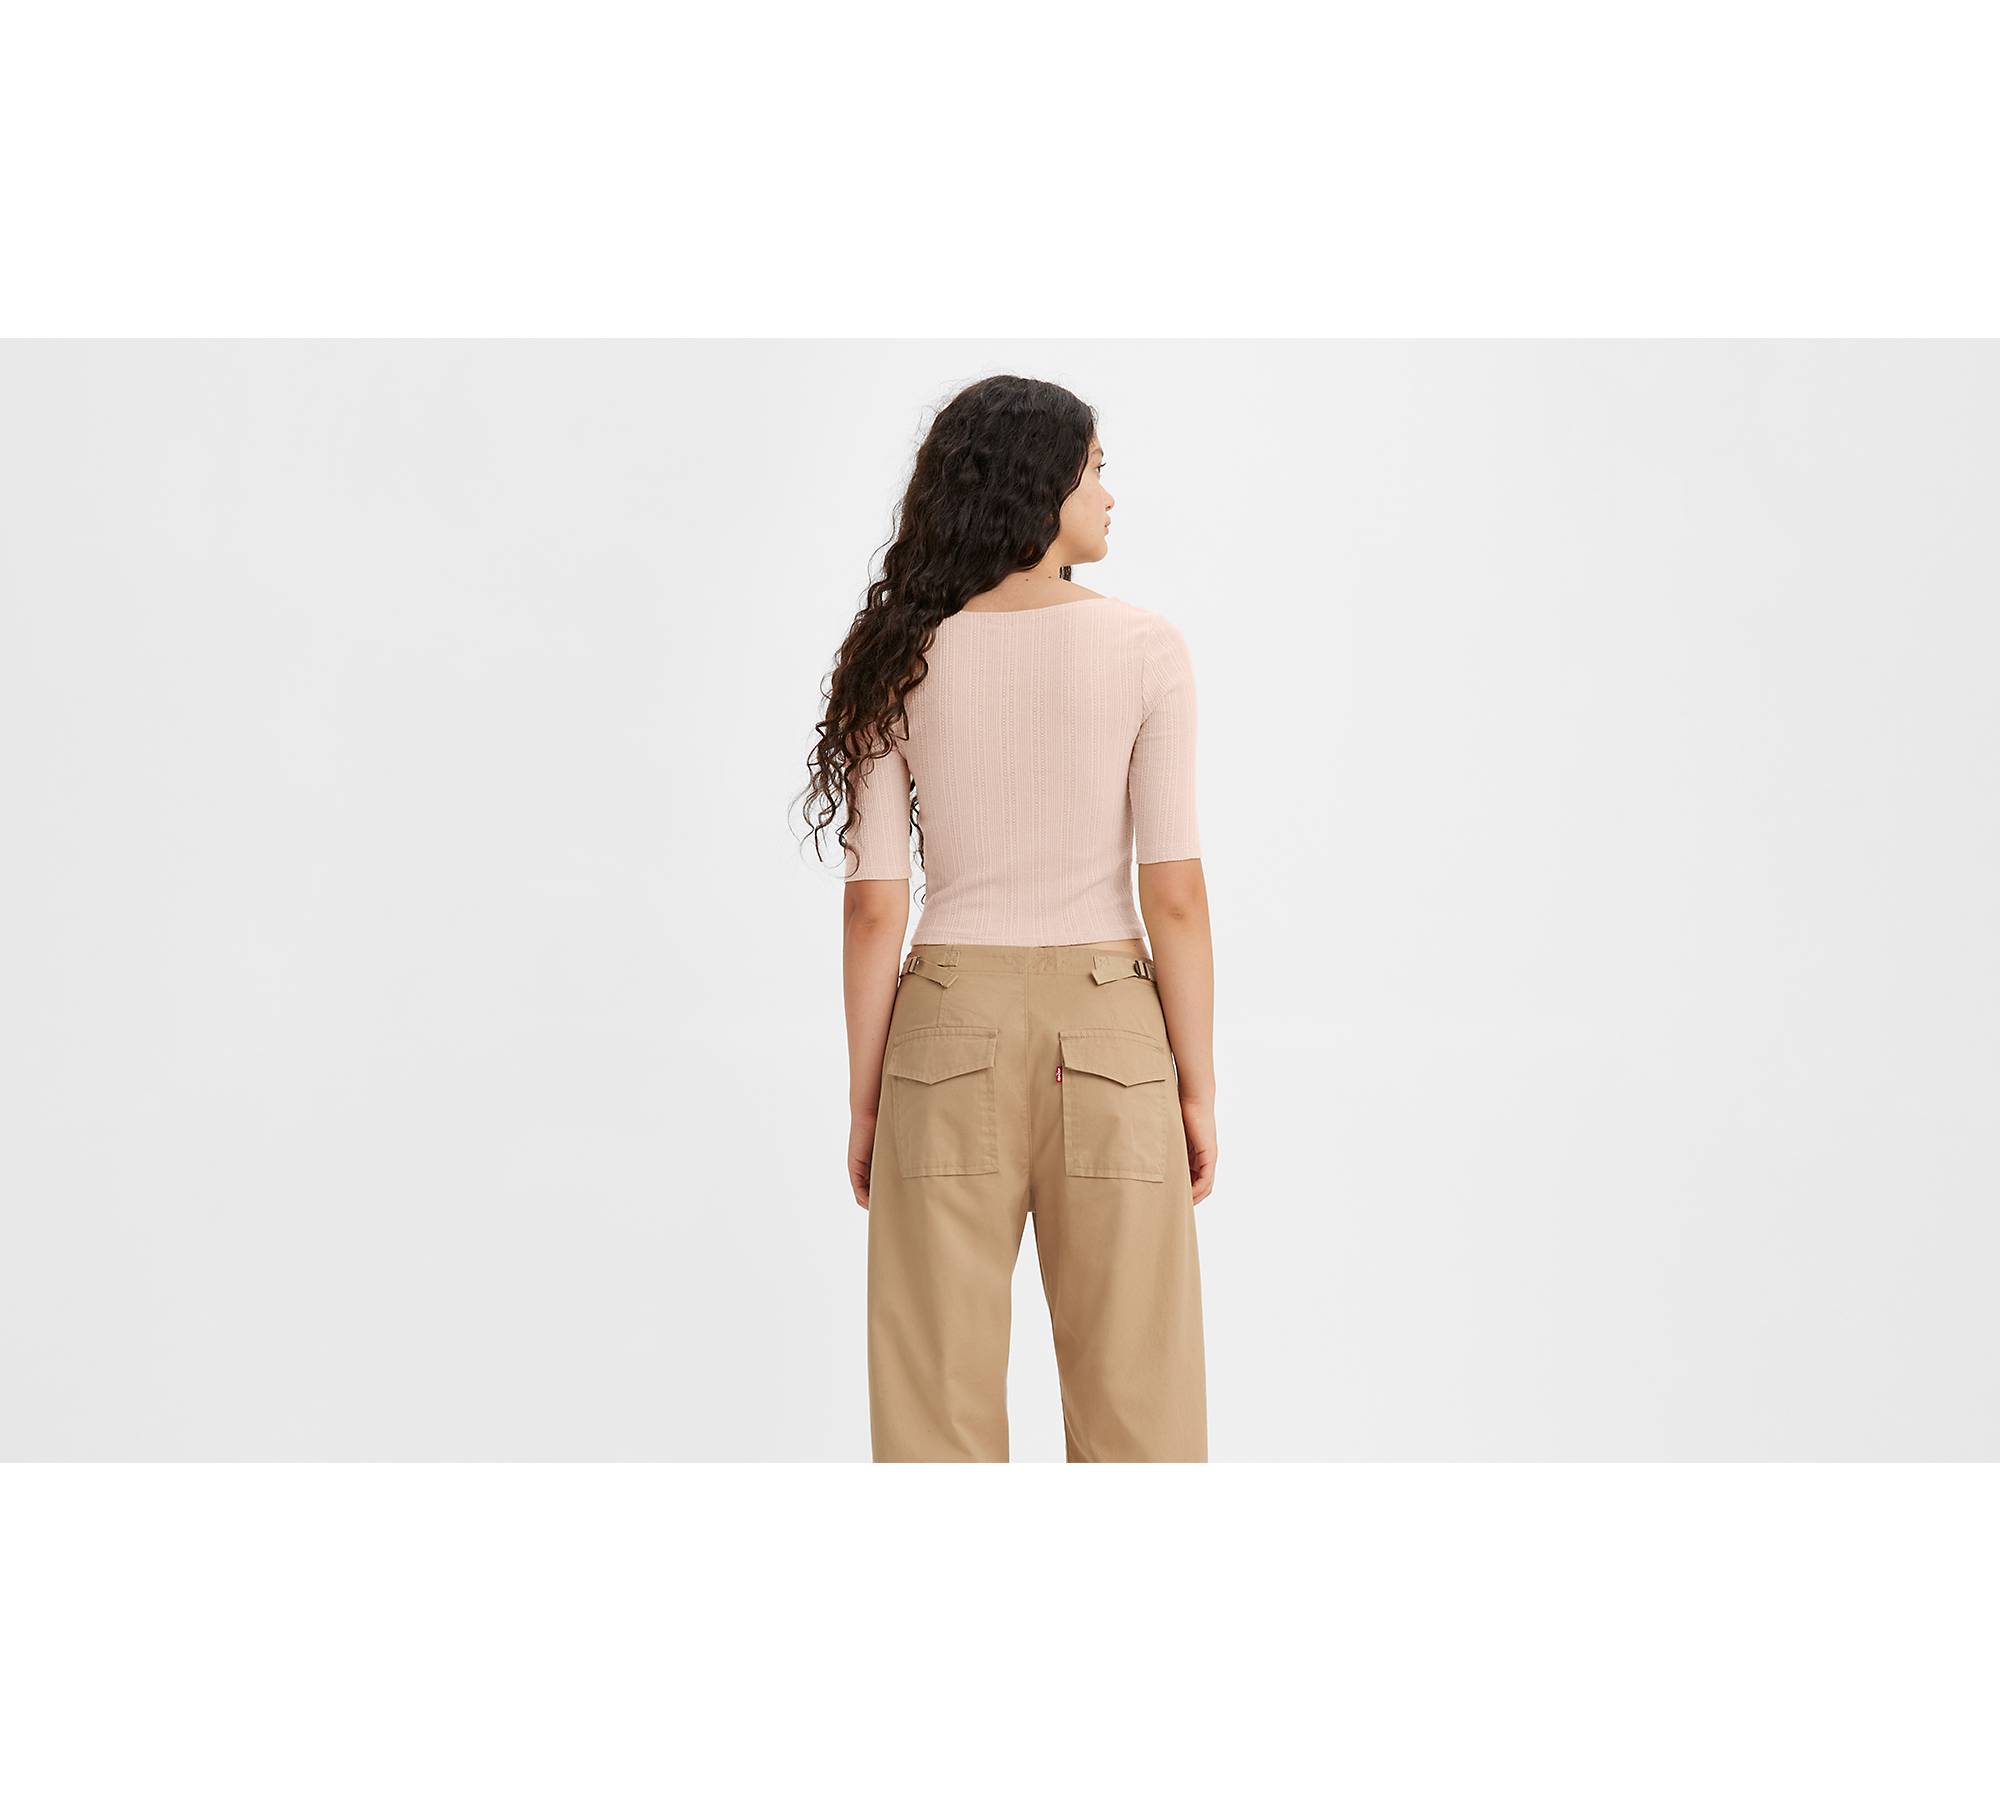 Dry Goods Pointelle Top - Pink